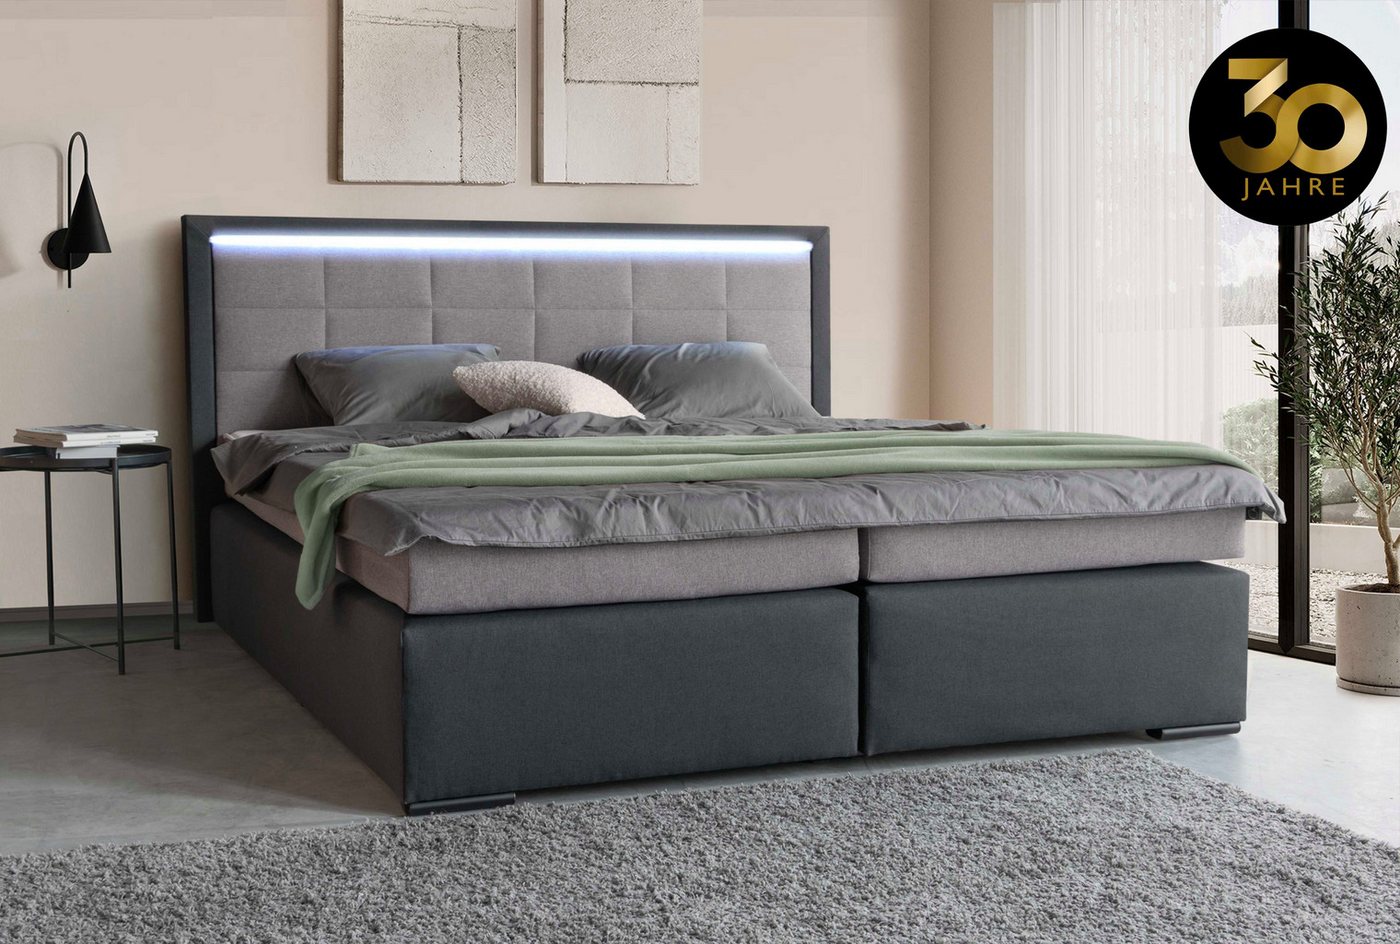 COLLECTION AB Boxspringbett 30 Jahre Jubiläums-Modell Athena, in H2,H3 & H4, inkl. Topper, inkl. LED-Leiste von COLLECTION AB